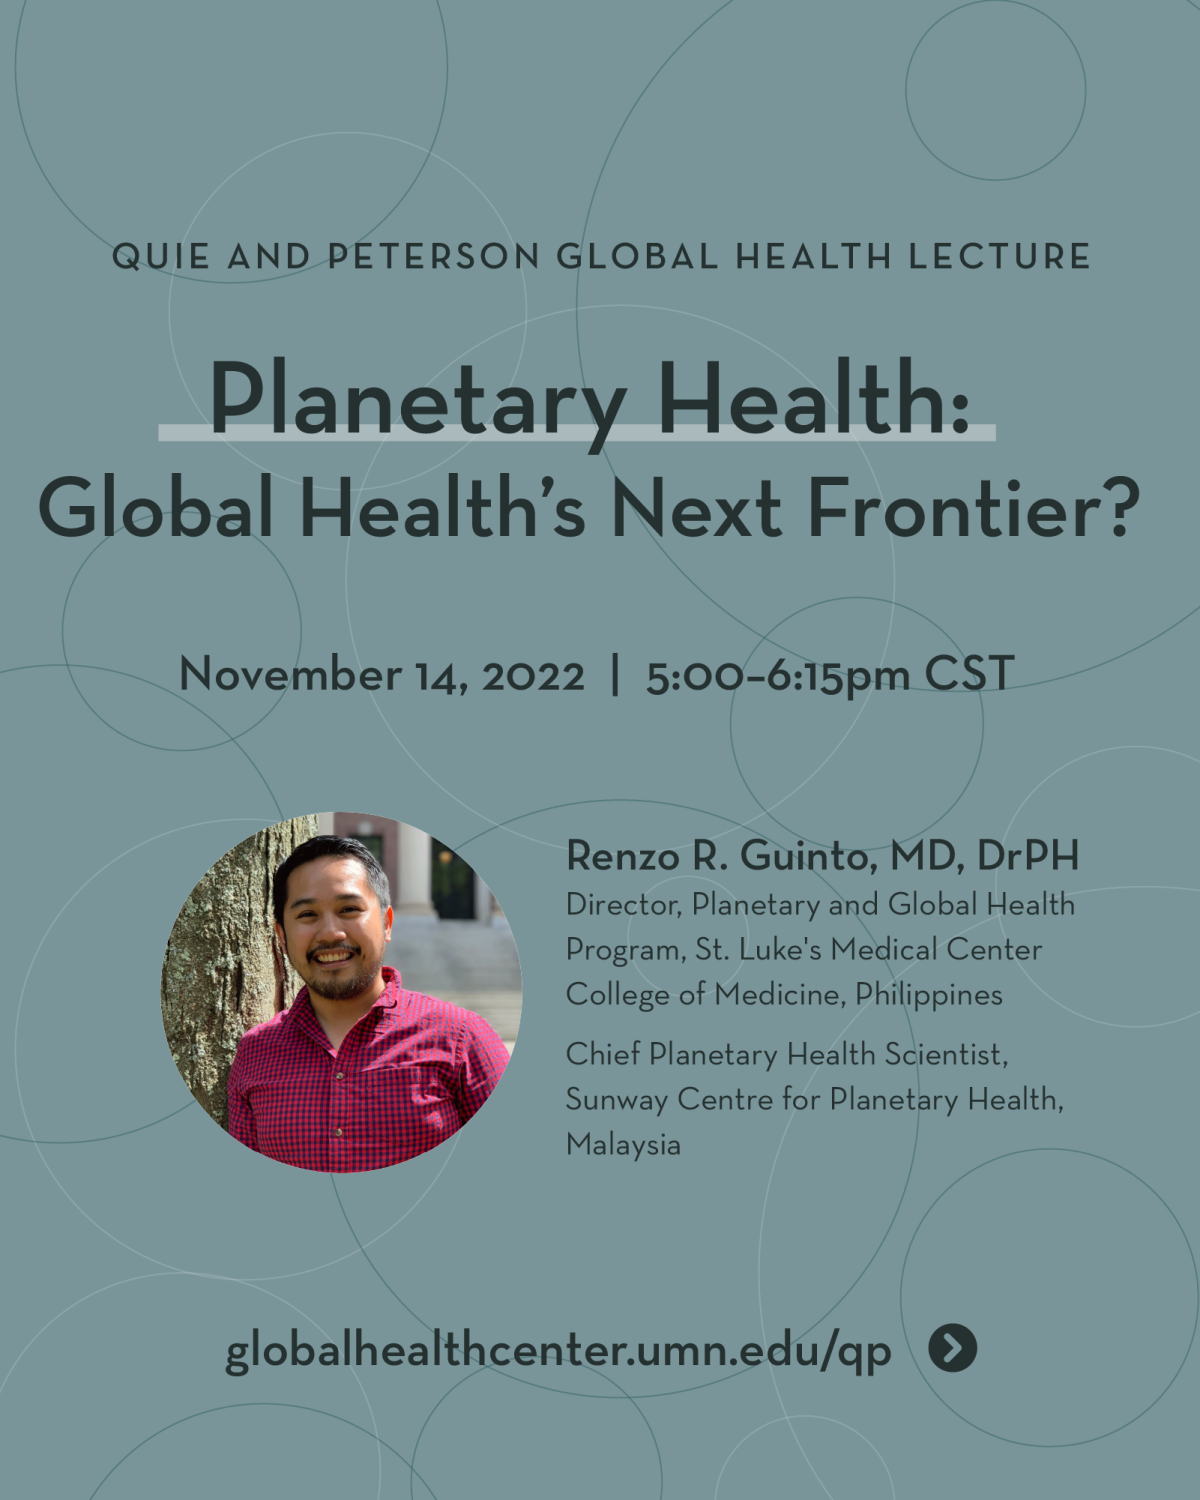 Teal background with a portrait of Dr Renzo Guinto. The text reads "Planetary Health: Global Health’s Next Frontier?" and has the date of the lecture: November 14, 2022; 5:00–6:15pm CST